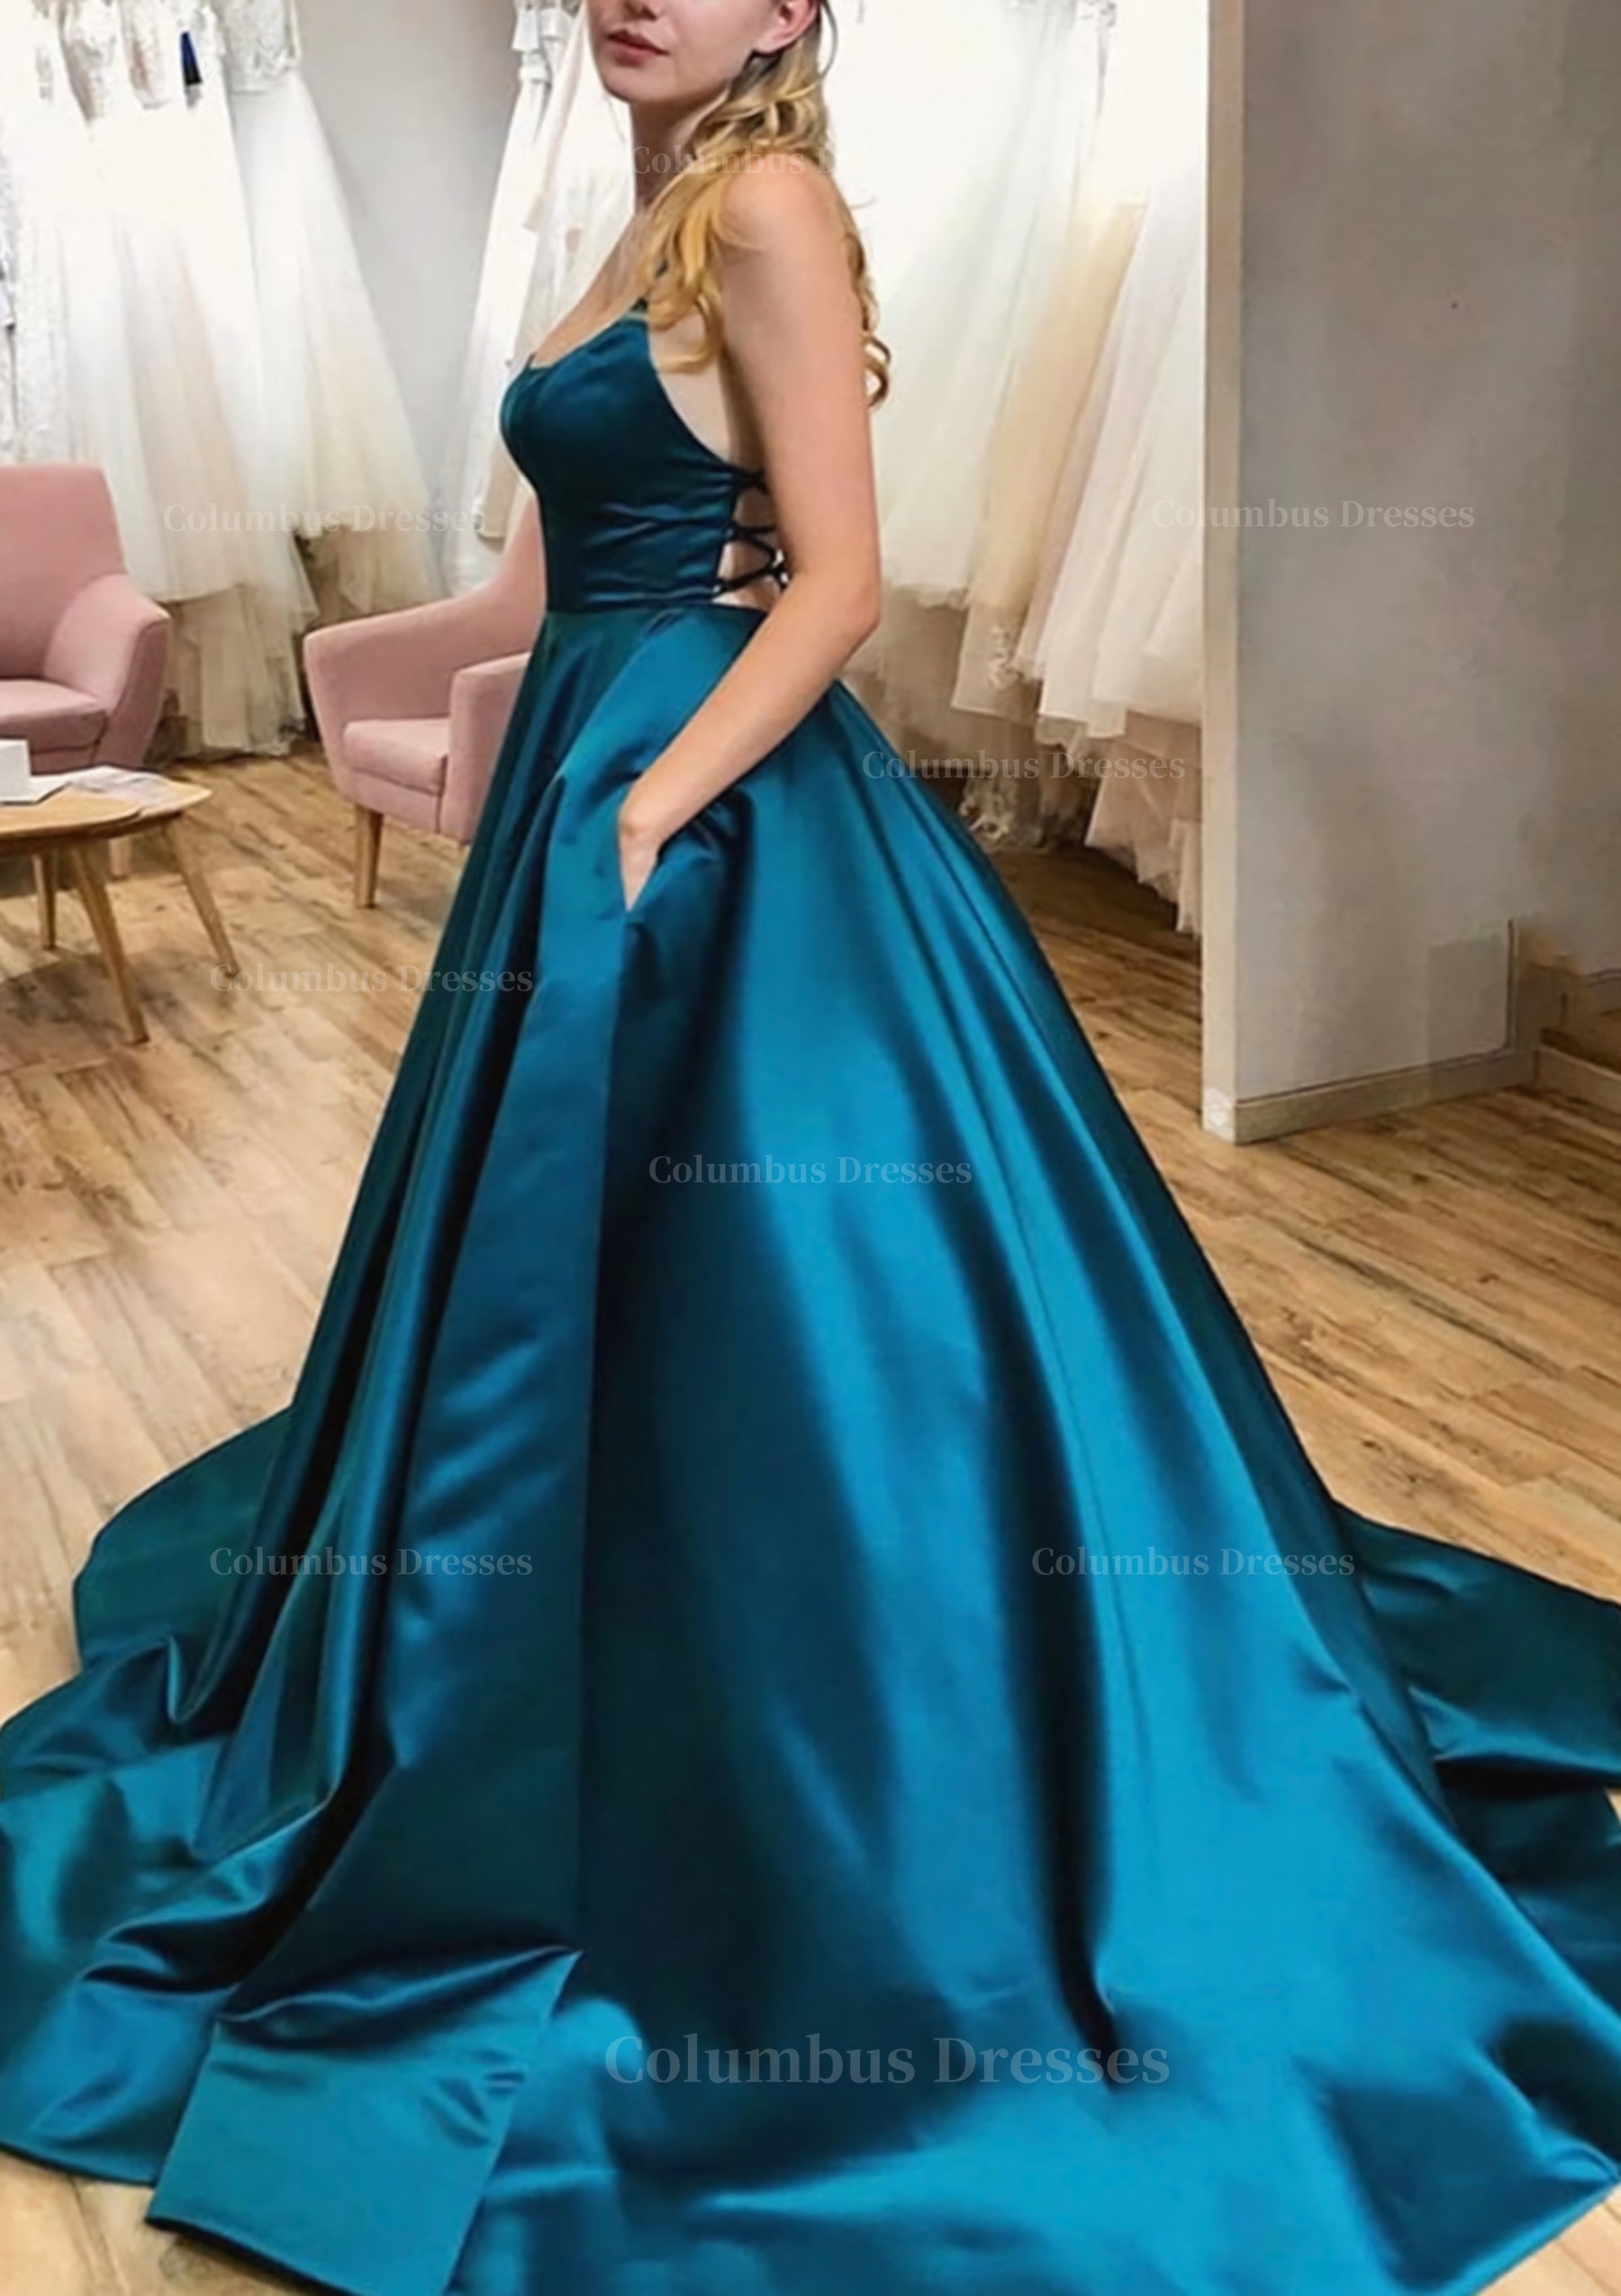 Prom Dress Long Mermaid, Ball Gown A-line Square Neckline Spaghetti Straps Sweep Train Satin Prom Dress With Pleated Pockets